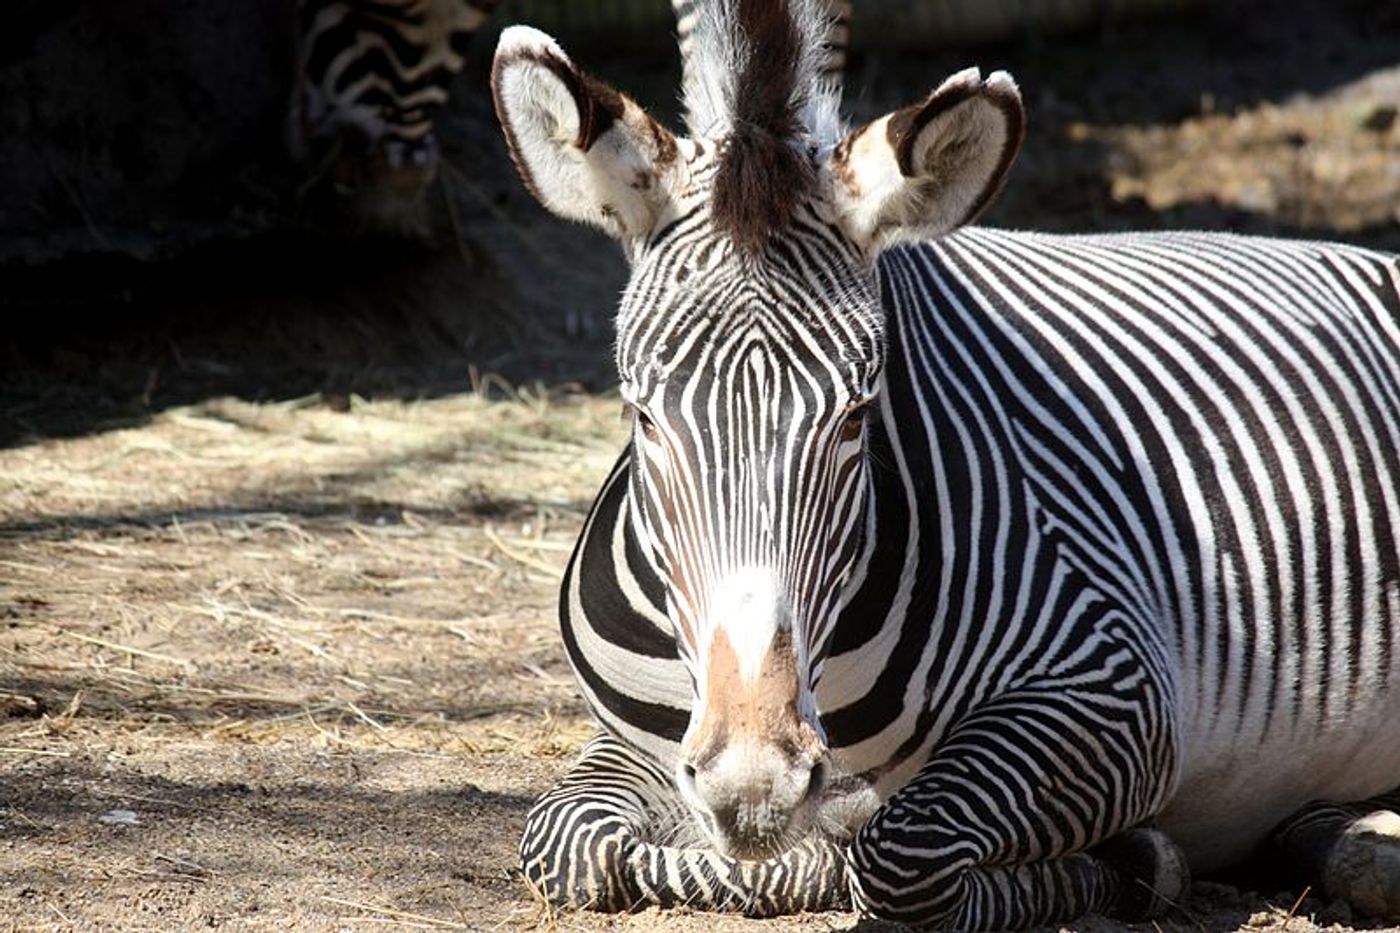 Zebras are among 74 declining species studied. The decline of these animals puts more landscapes in danger than previously known.